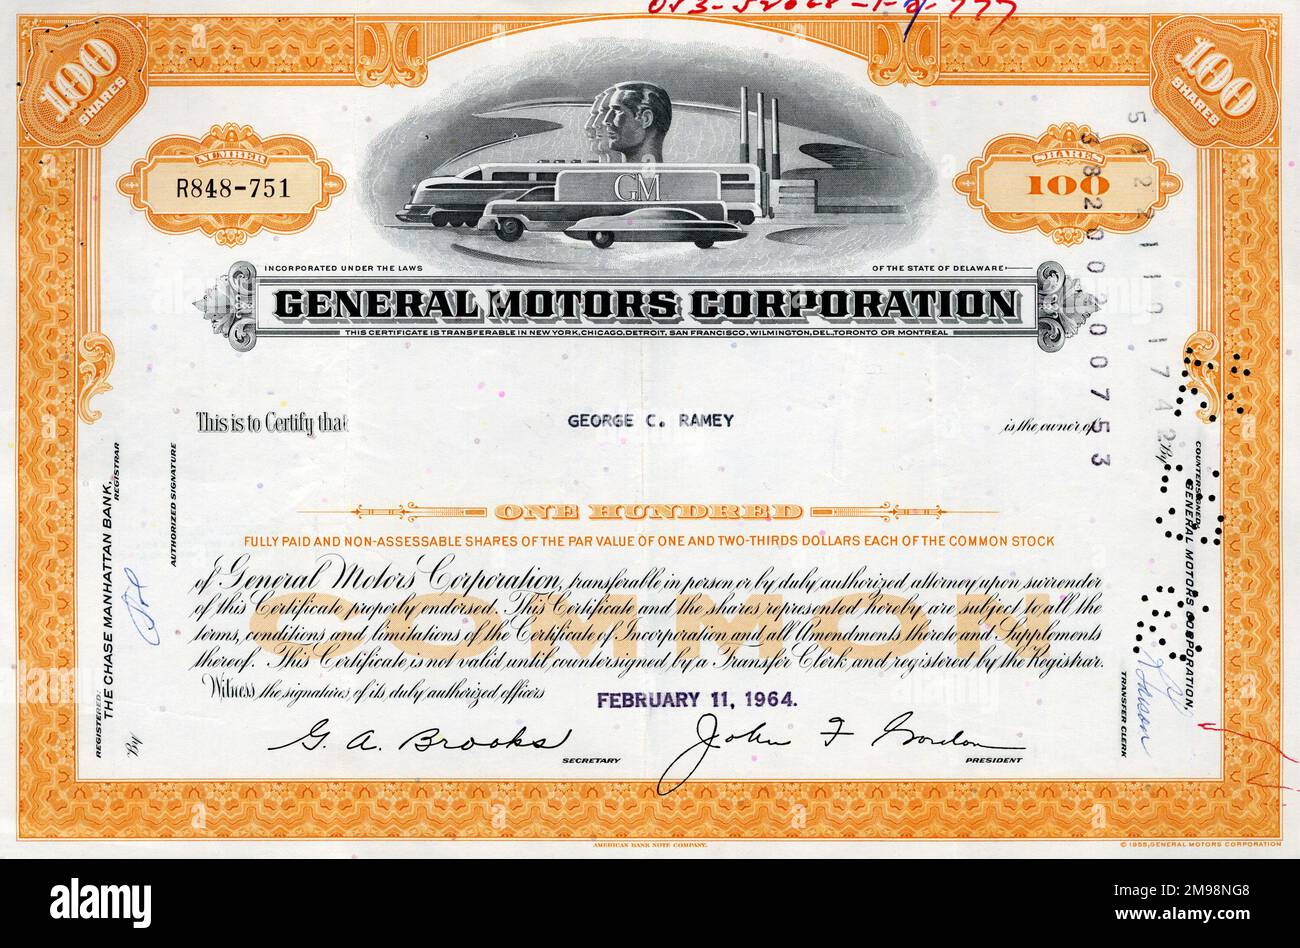 Stock Share Certificate - General Motors Corporation, 100 shares. Stock Photo